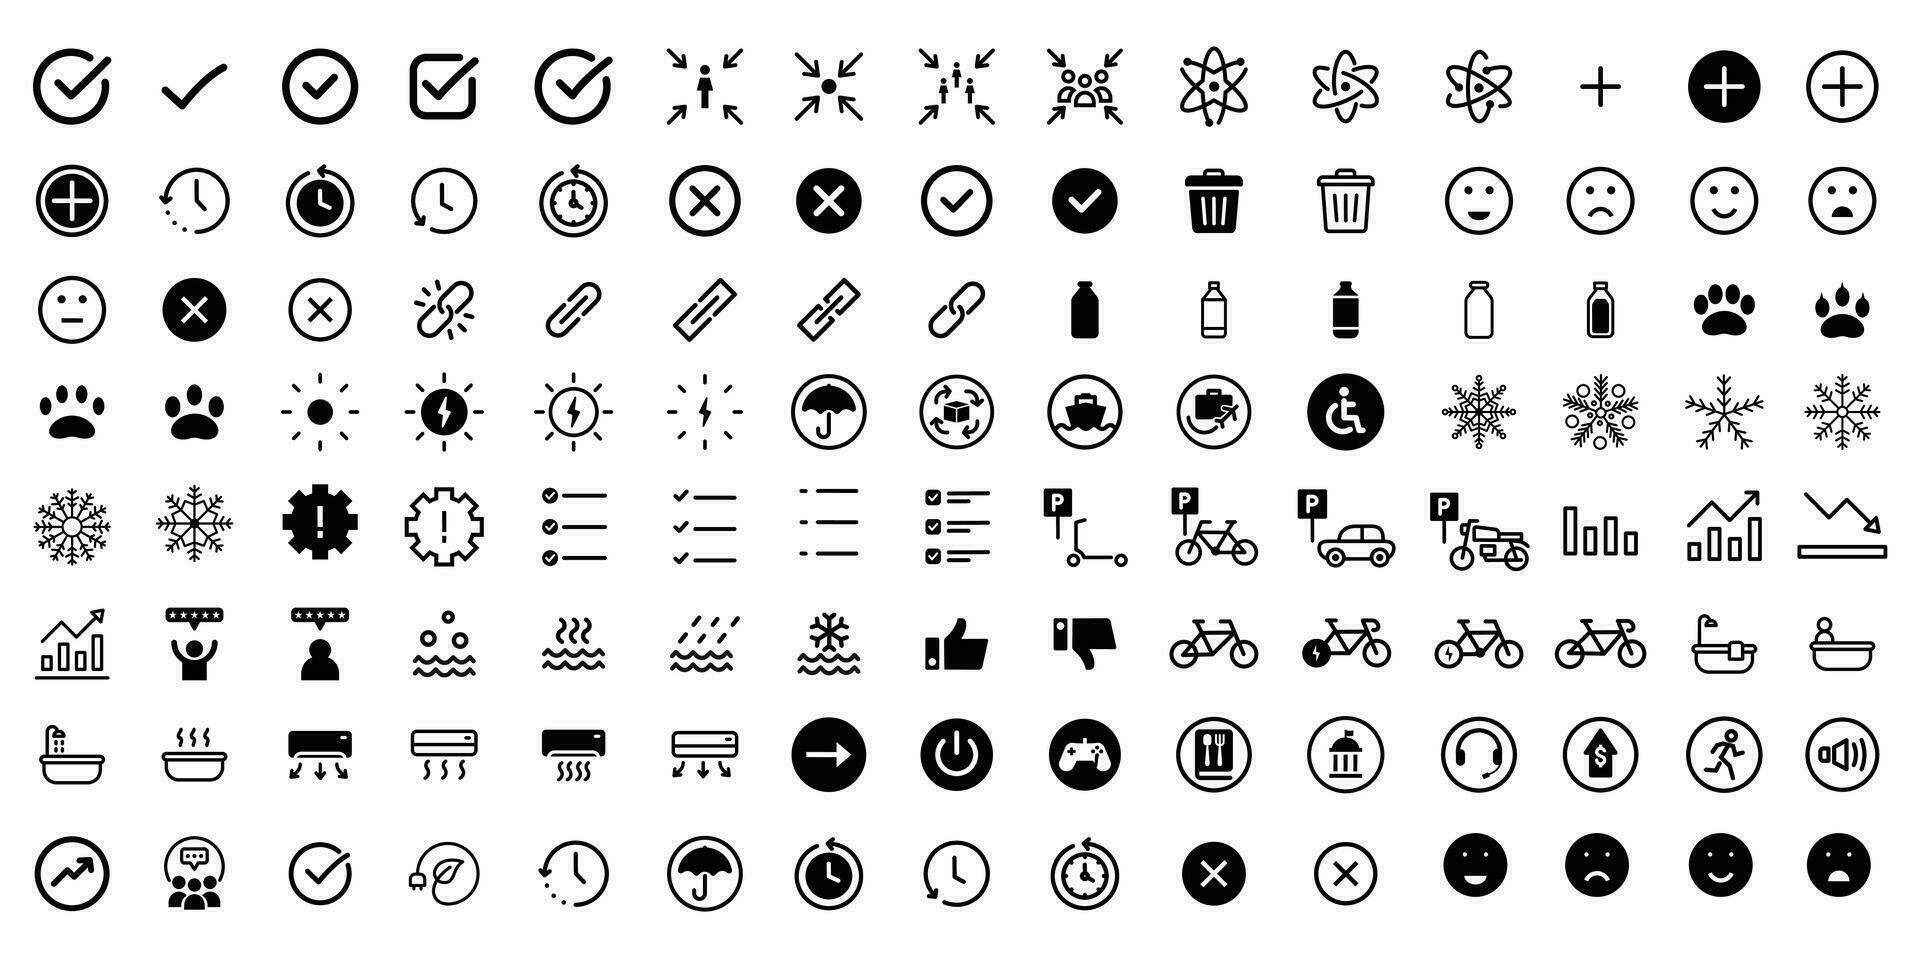 Big bundle of technology and lifestyle icon vector